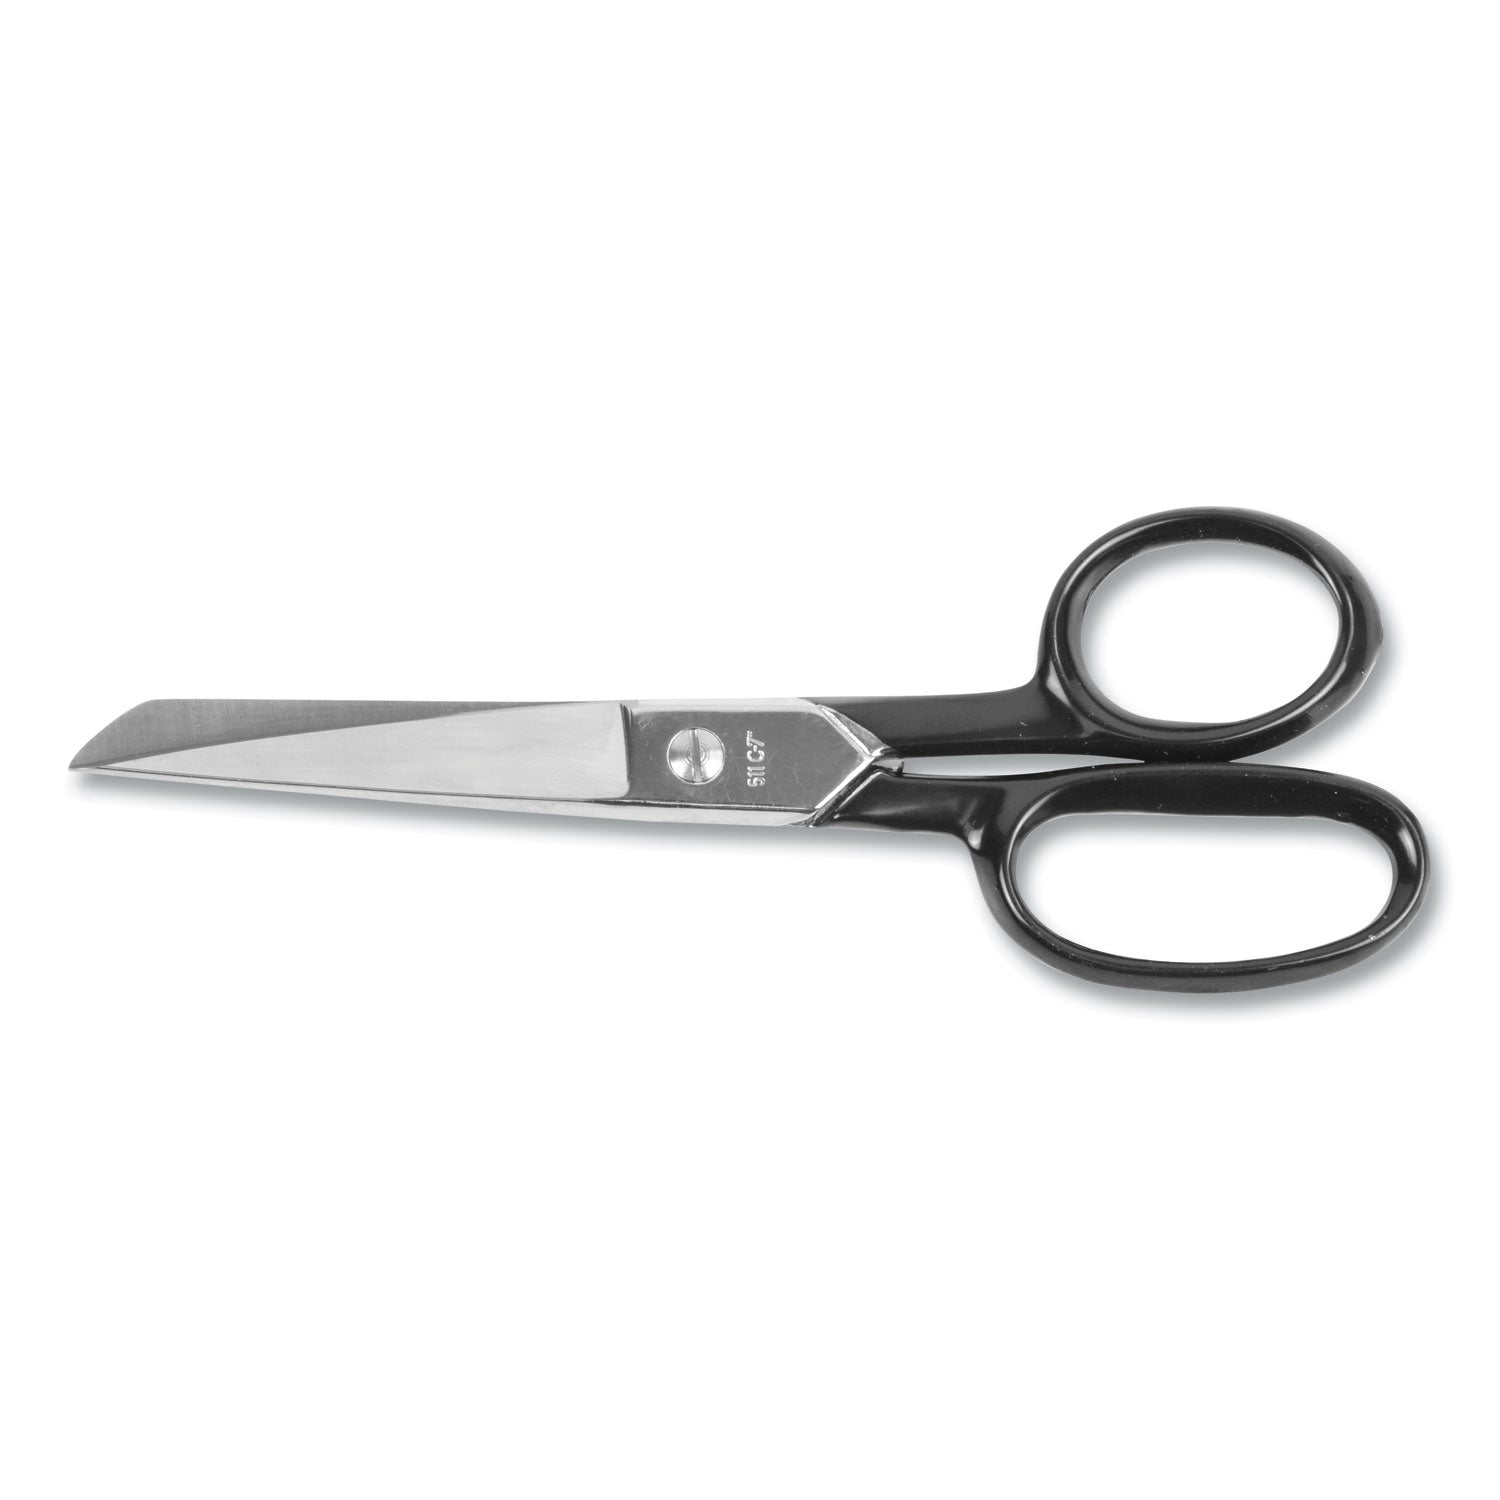 Hot Forged Carbon Steel Shears, 7" Long, 3.13" Cut Length, Black Straight Handle - 